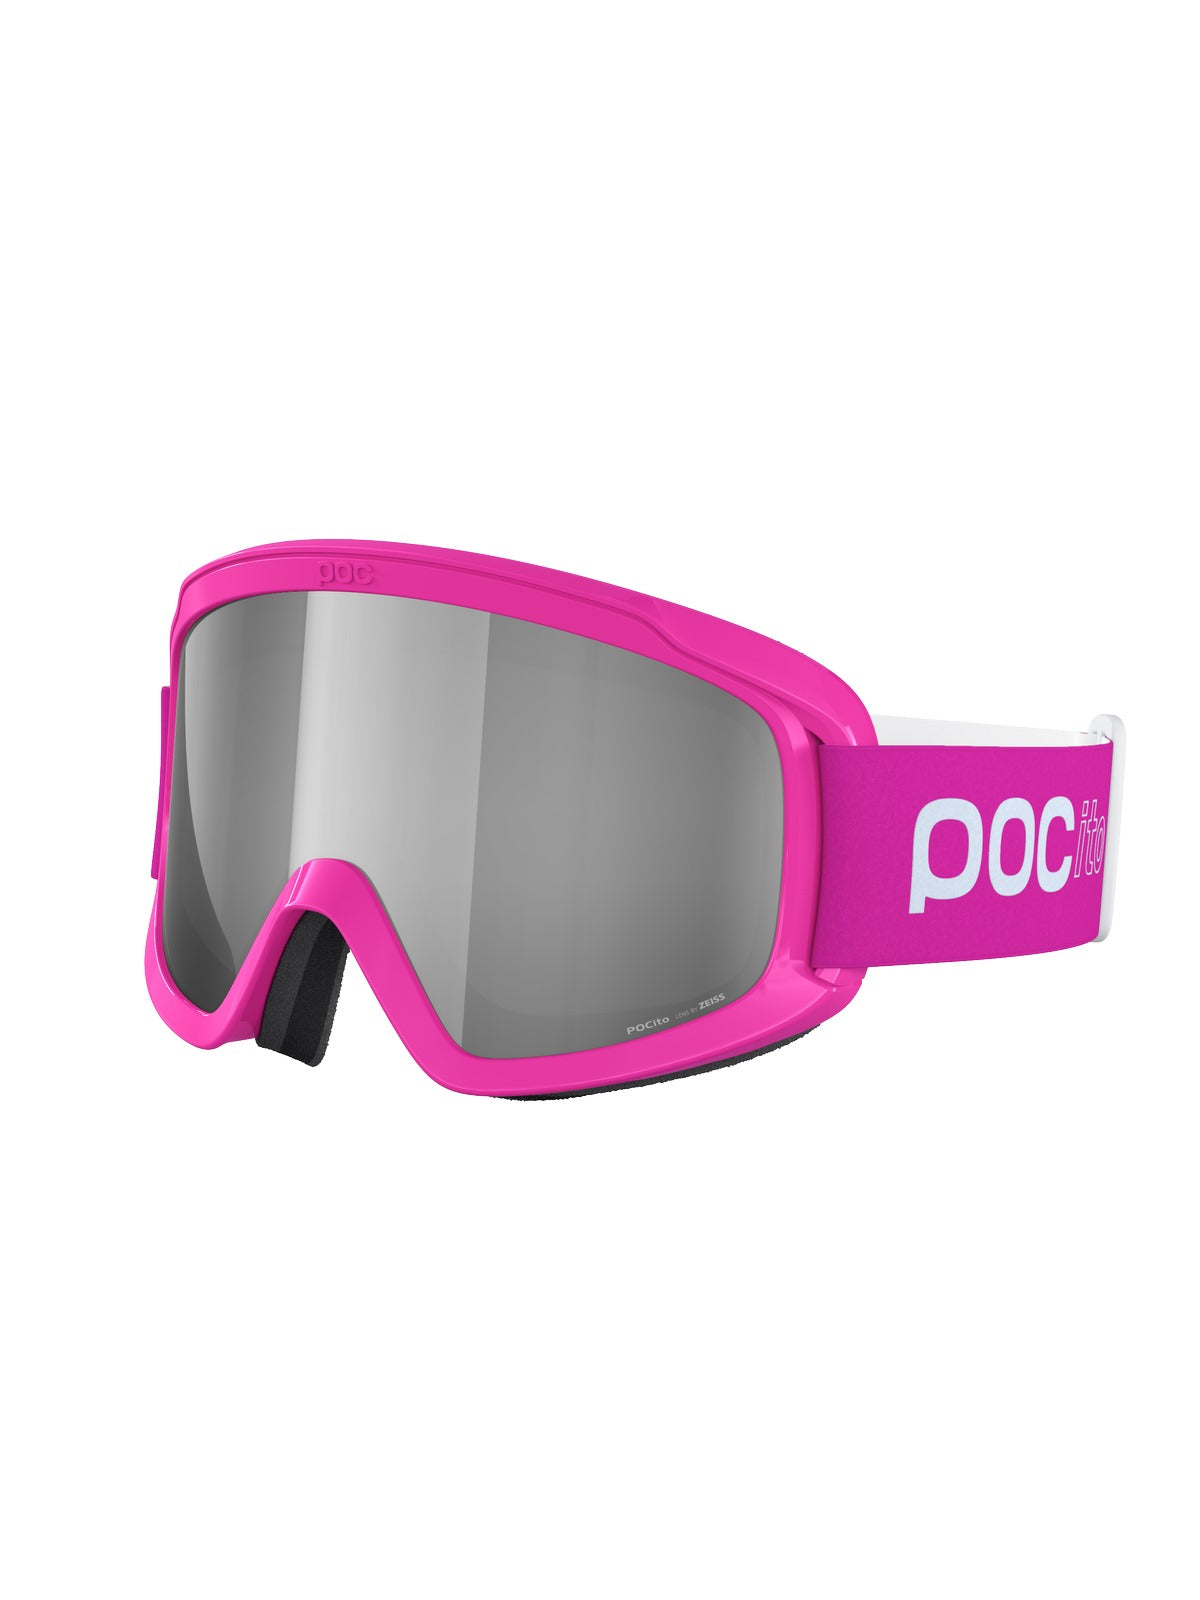 Gogle dziecięce POCito Opsin - Fluo. Pink/Clarity POCito Cat 2